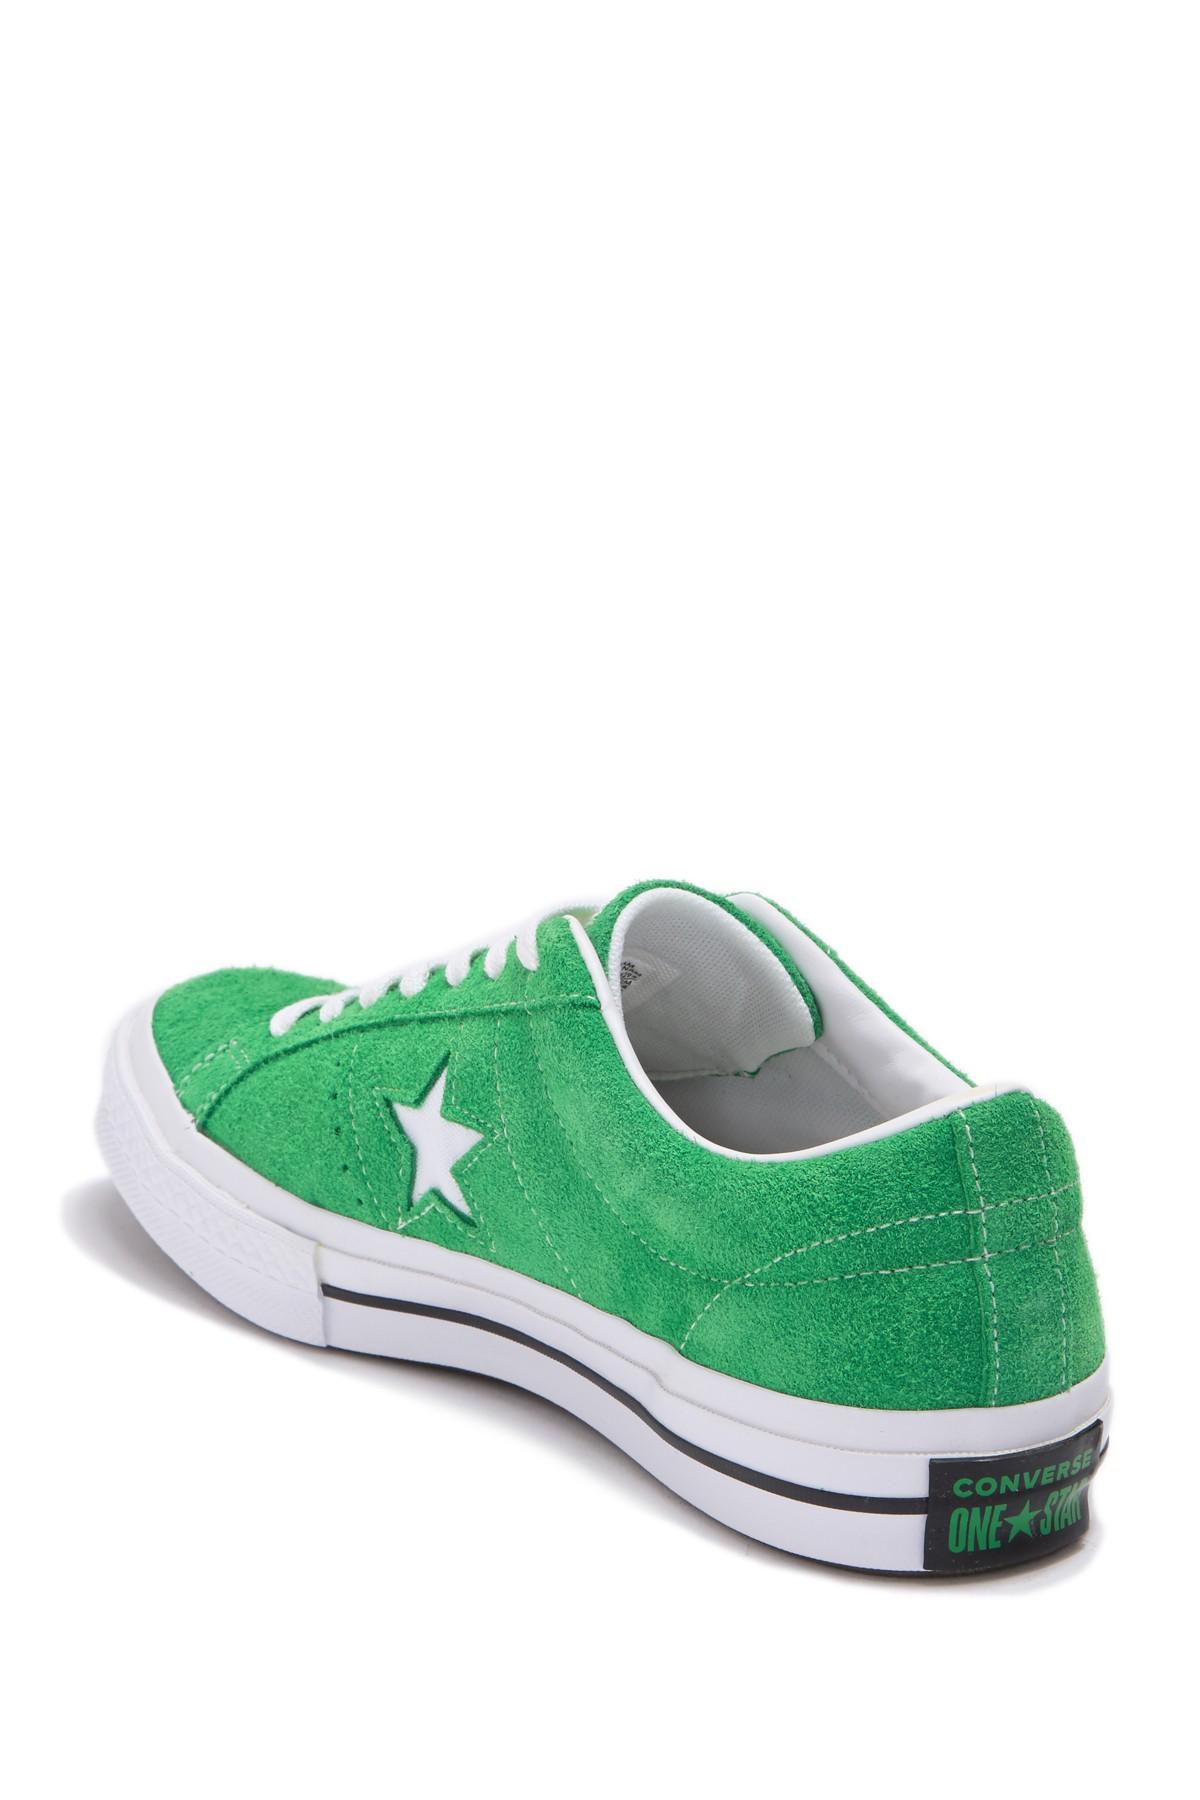 Converse One Star Oxford Green Star for - Lyst